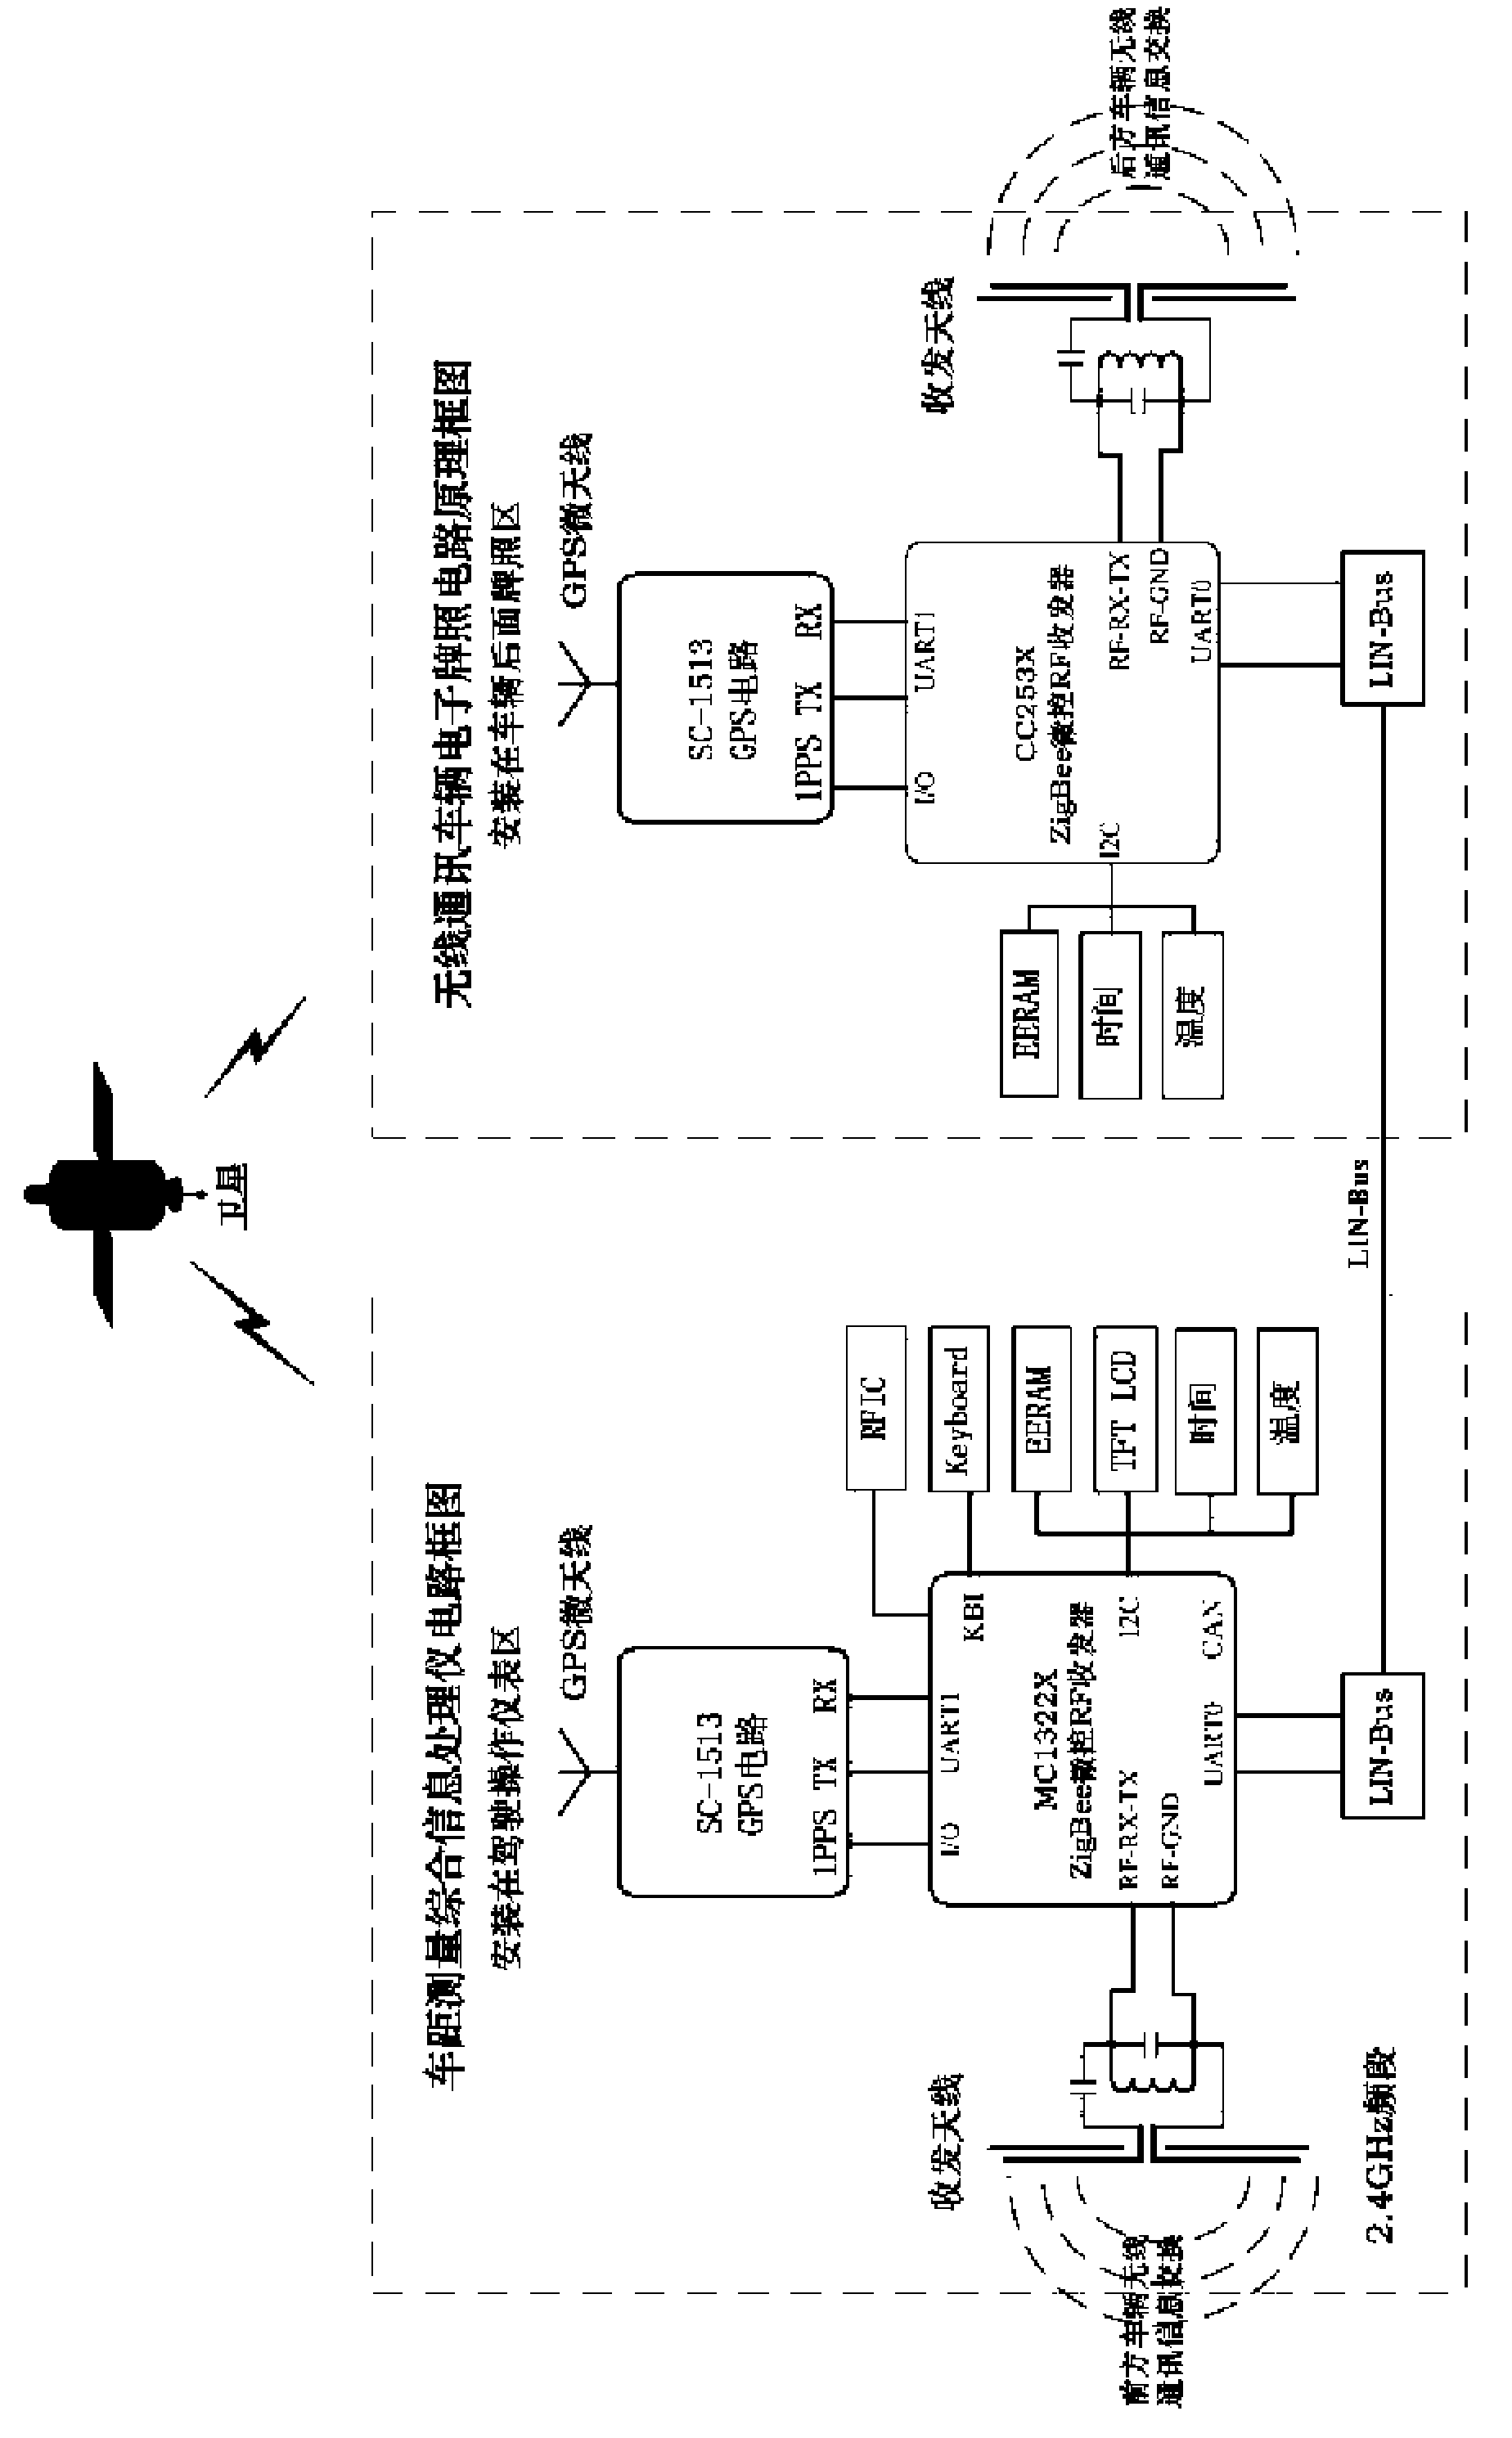 Wireless communication electronic vehicle license and vehicle distance measuring system